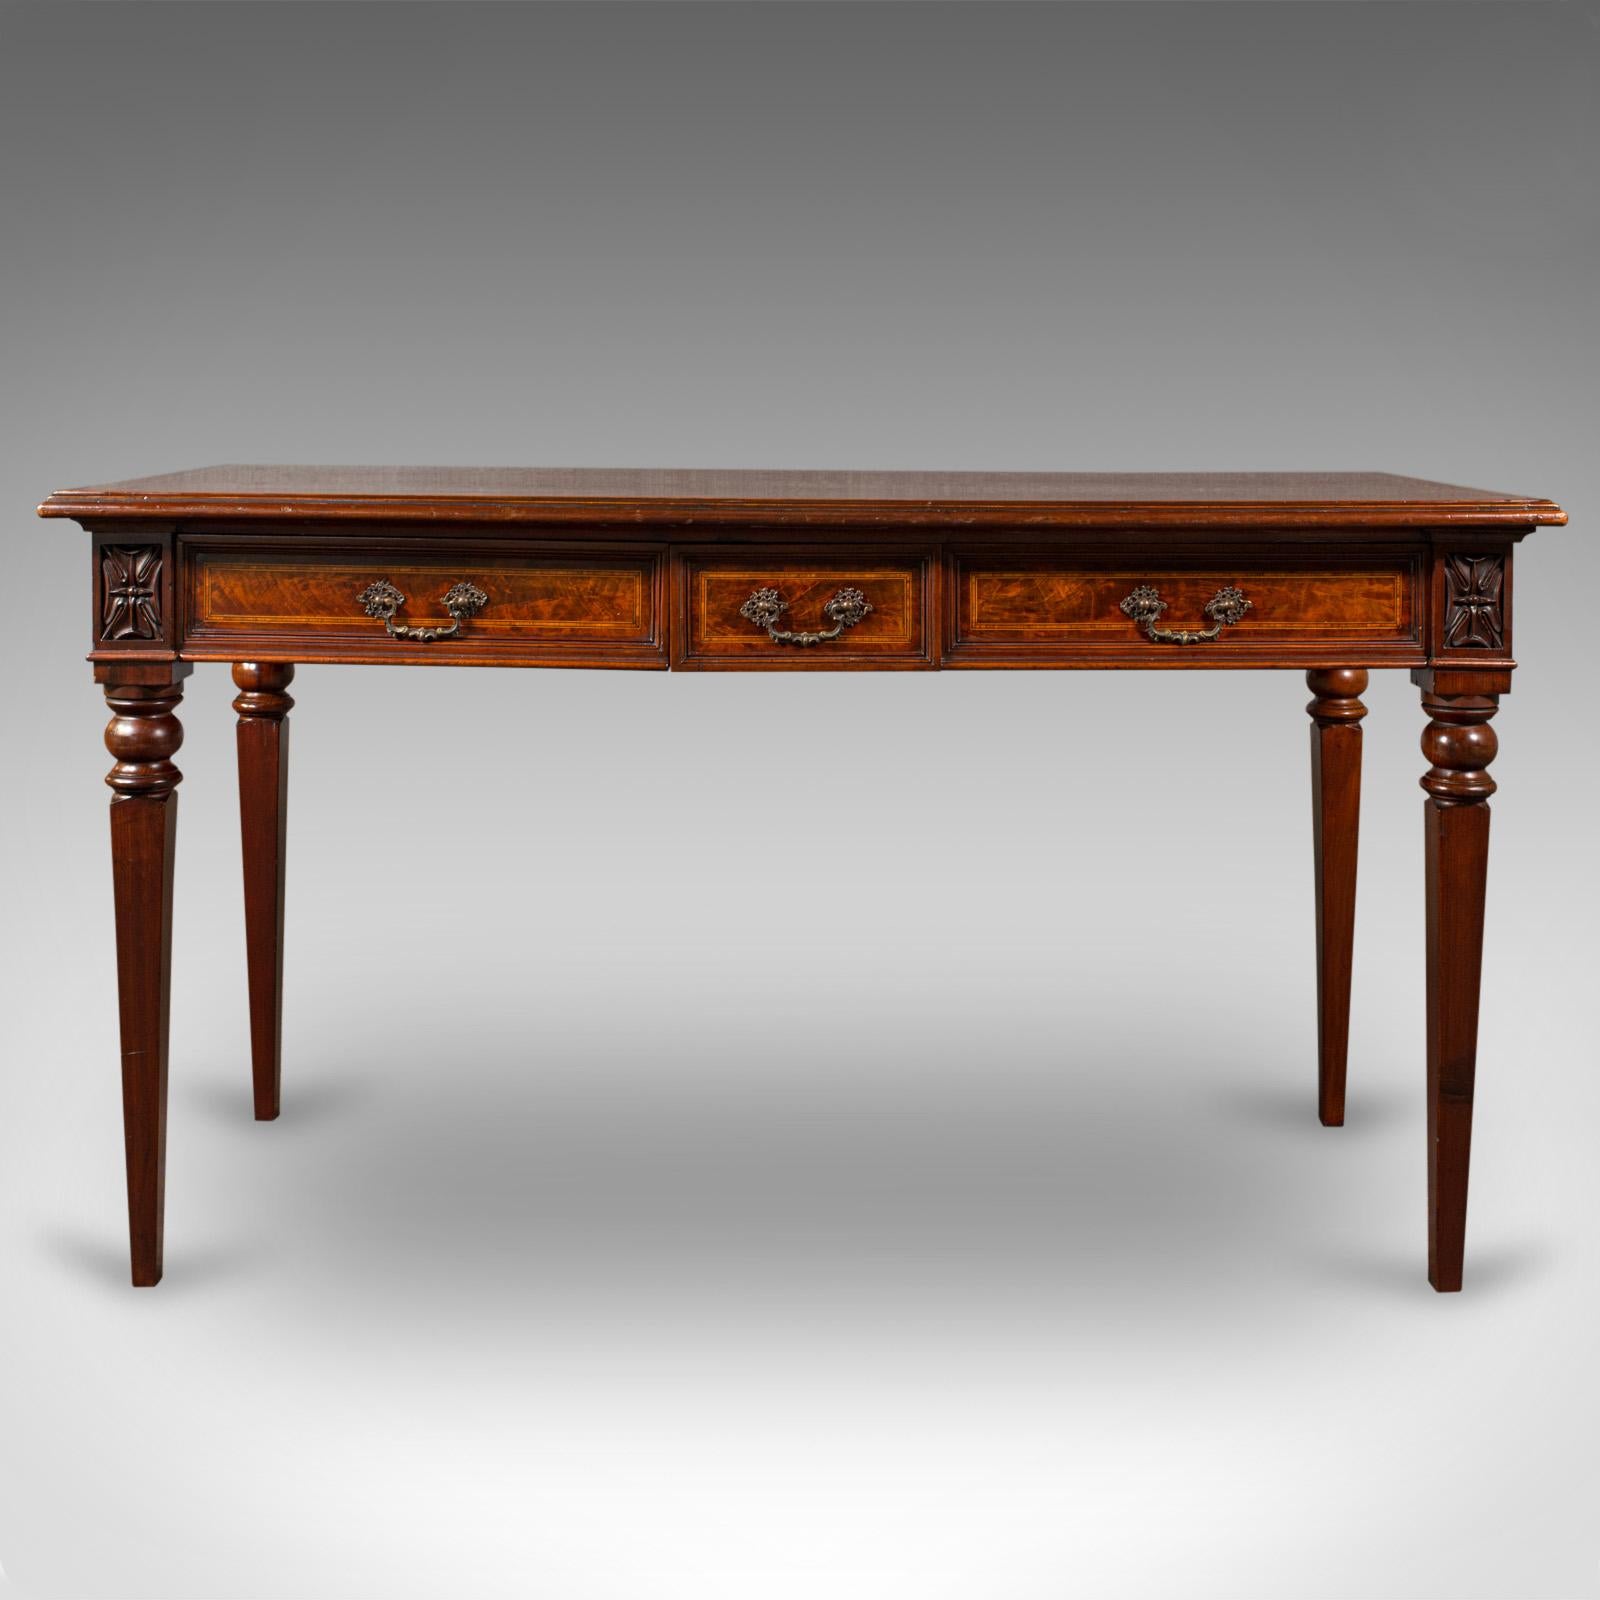 This is an antique writer's desk. An English, mahogany side or serving table, dating to the Georgian period, circa 1800.

Of superb proportion and fine presentation
Displays a desirable aged patina and in good order throughout
Select stocks show